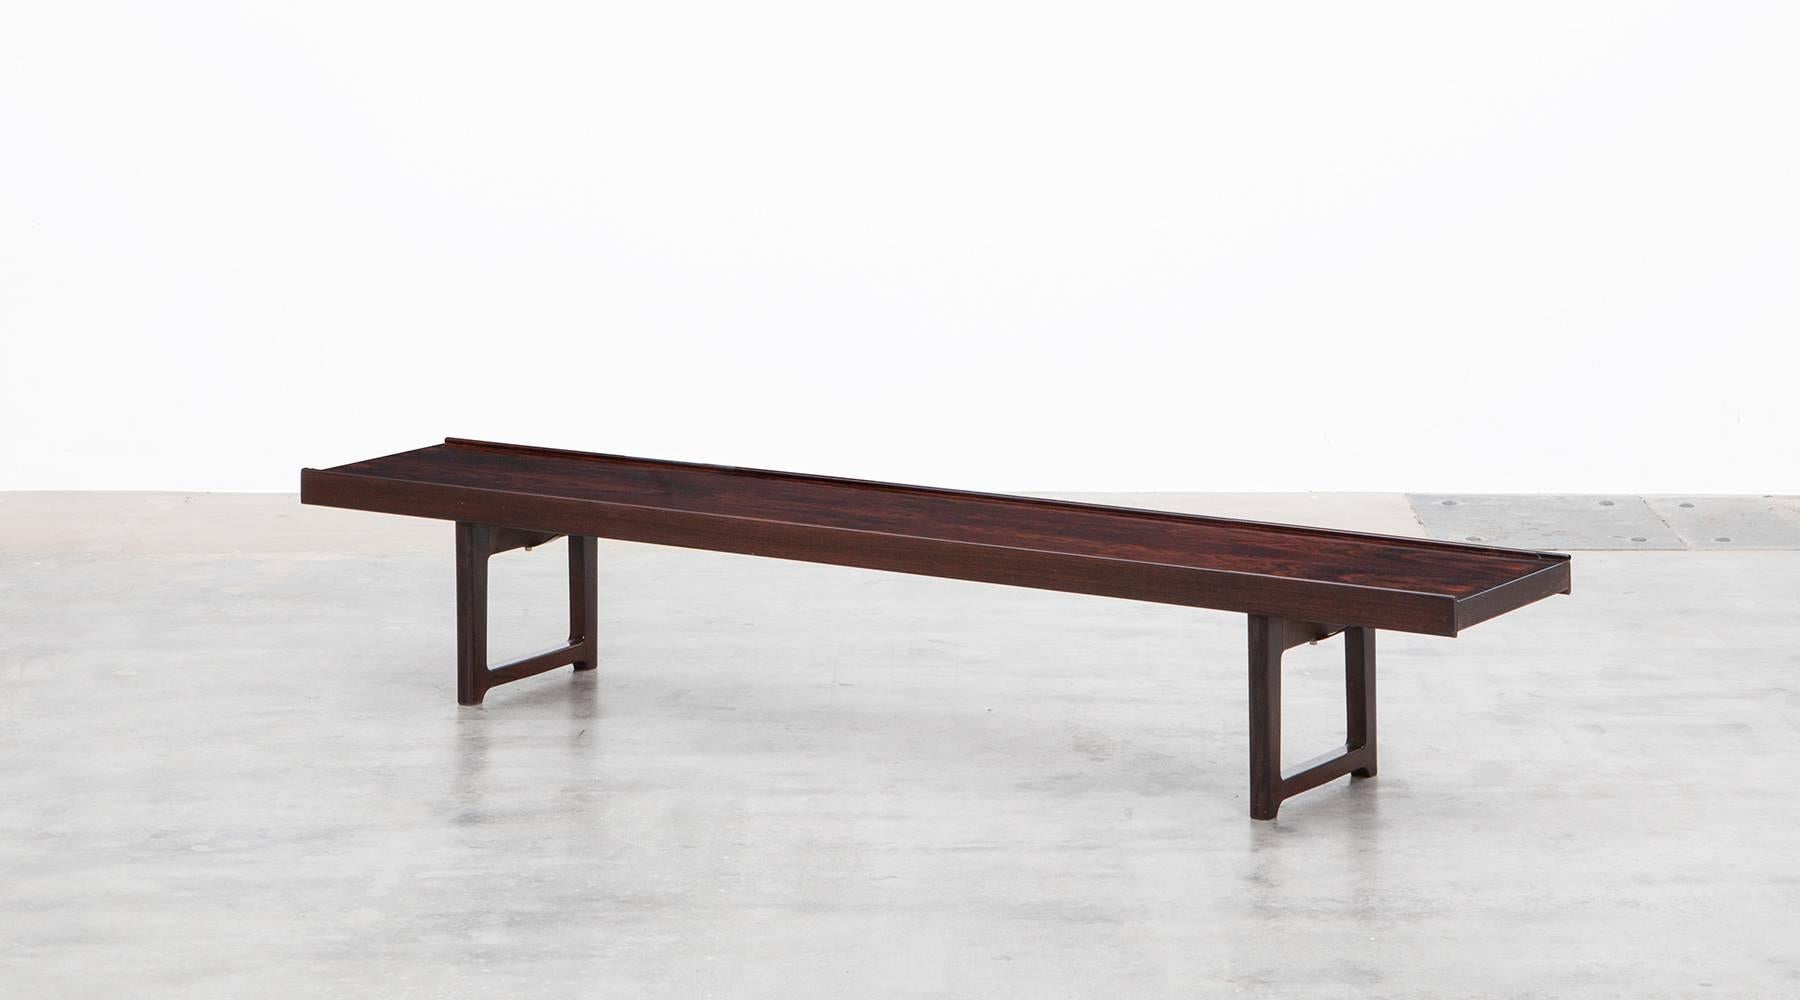 Clean-lined and solid long bench exemplary for Torbjorn Afdals designs. The bench can be also set up as coffee table and comes in exquisitely patterned wood with solid legs. Manufactured by Bruksbo. A further pair of benches in stock. 

Bruksbo